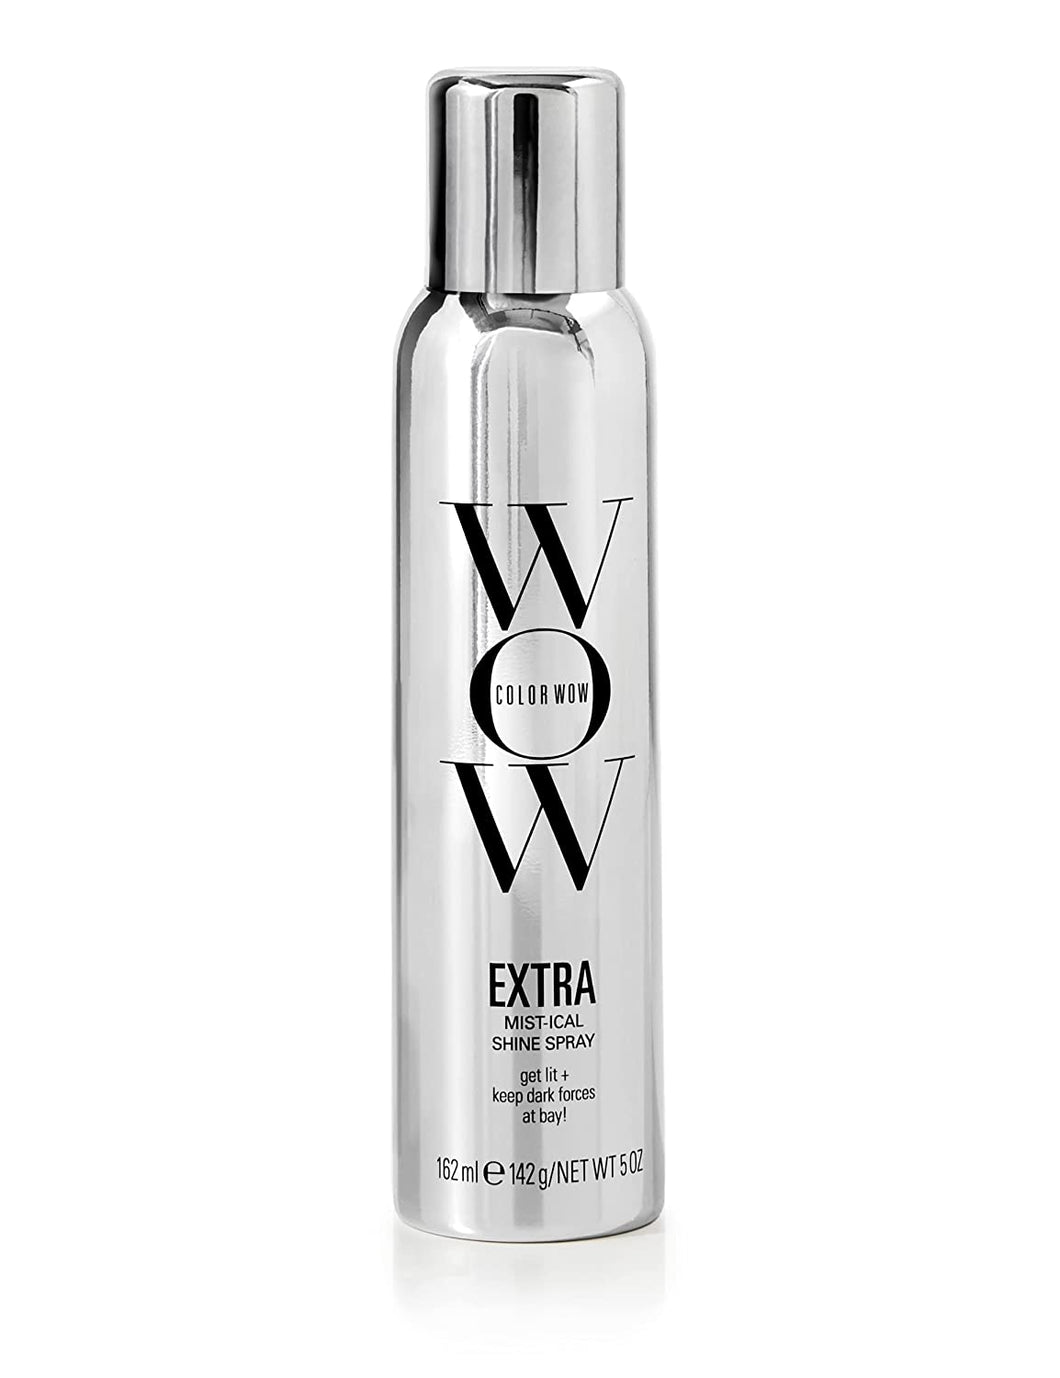 COLOR WOW Extra Mist-Ical Shine Spray - Add Lightweight Gloss & Shine to Dull, Dry Hair with Botanical Shine Source Mullein